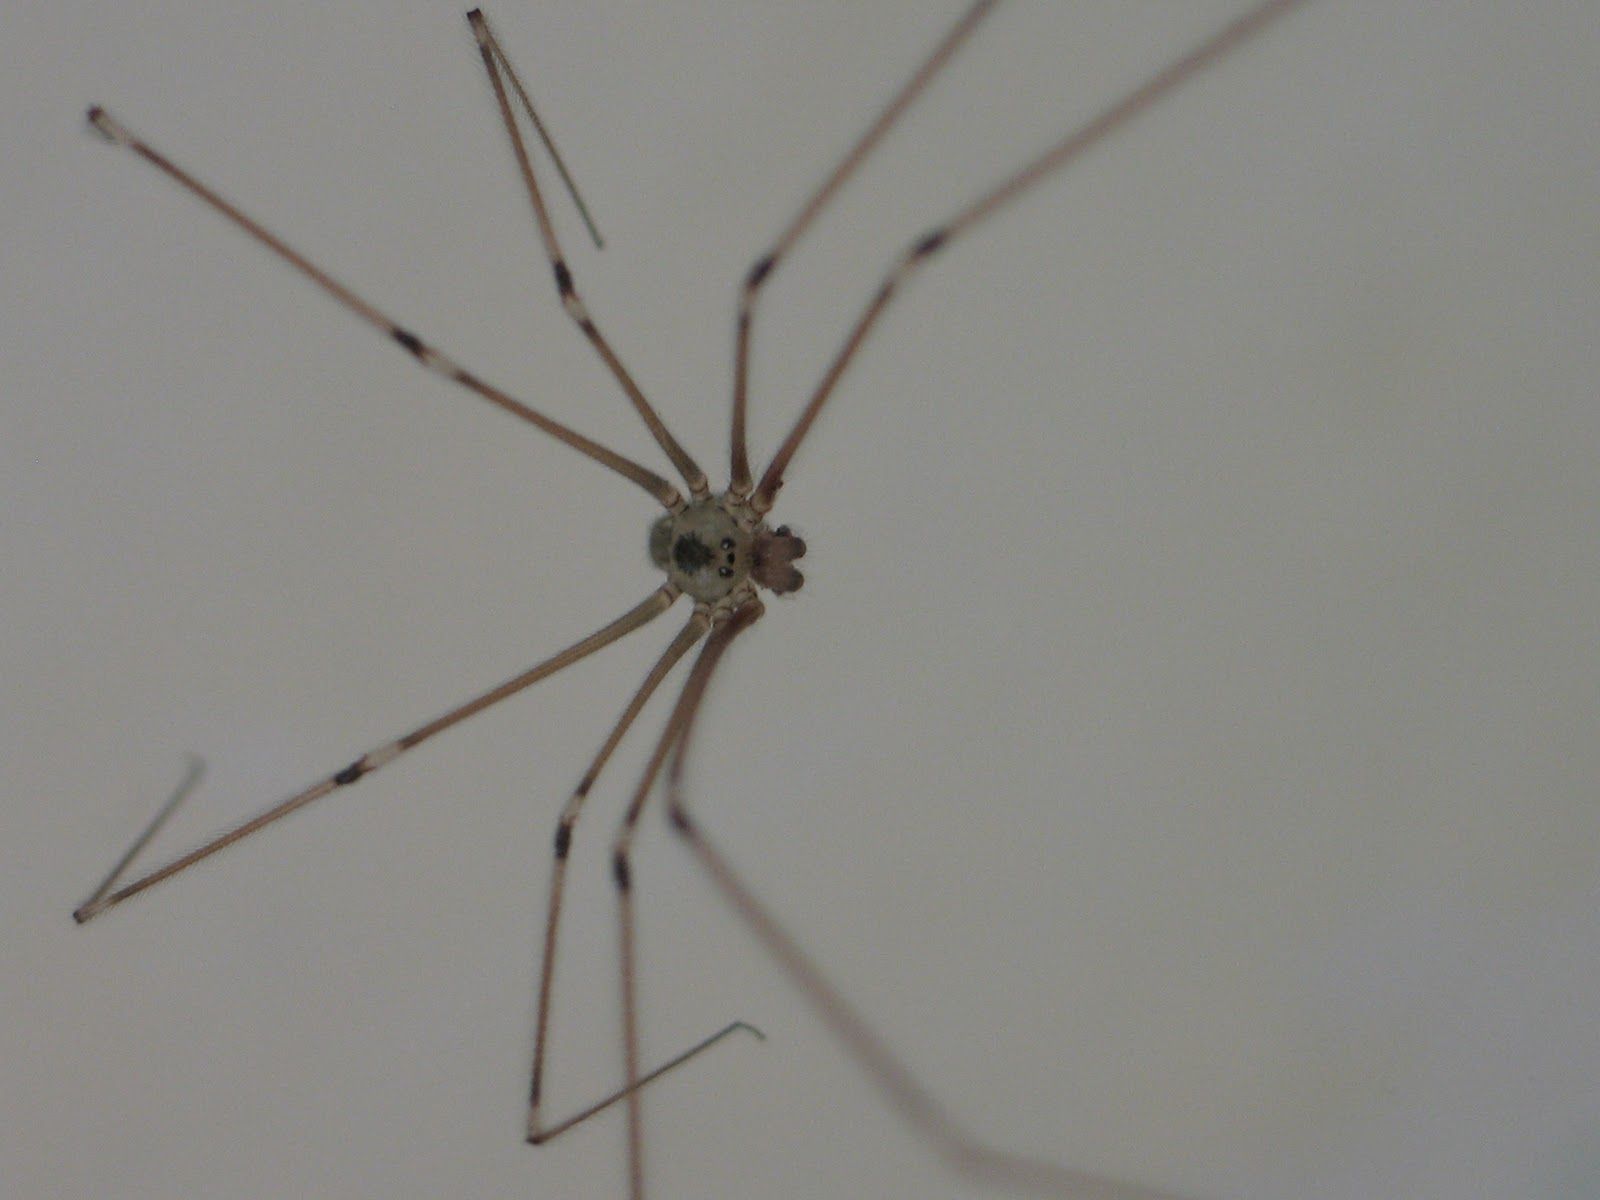 BugBlog: Pholcus Phalangioides, The Daddy Long Leg Spider